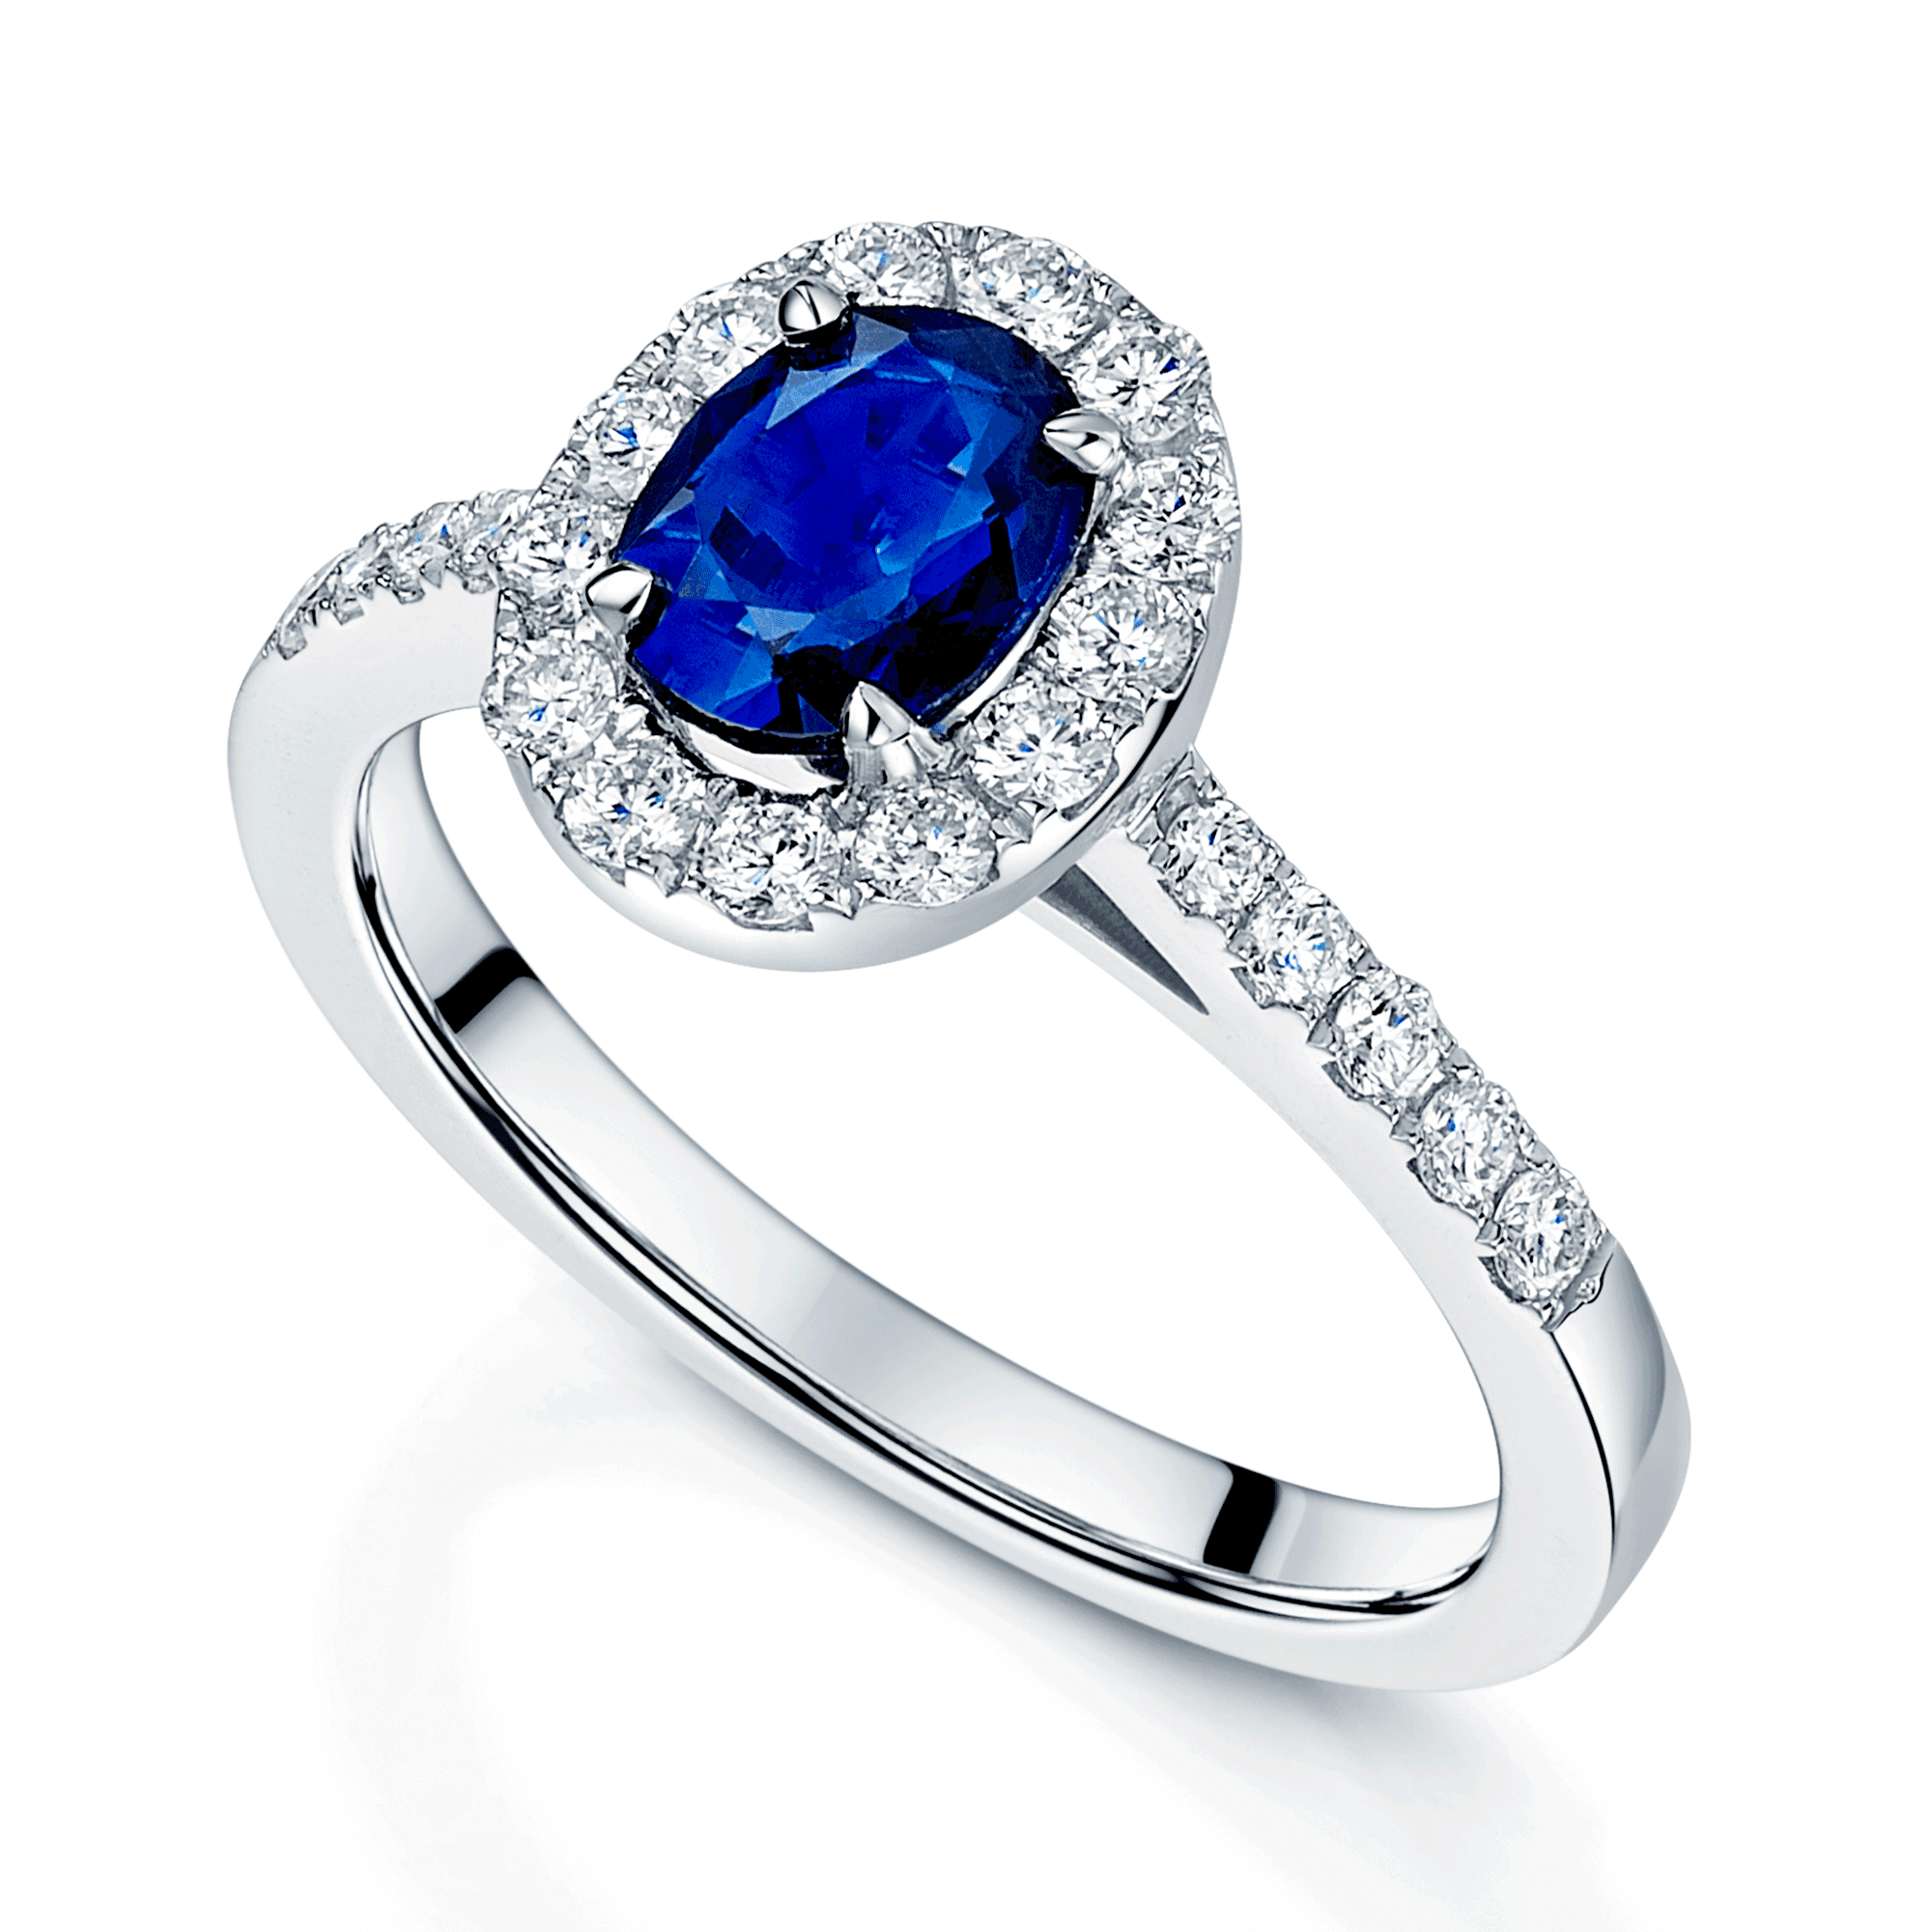 18ct White Gold Oval Sapphire & Diamond Halo Ring With Diamond Shoulders